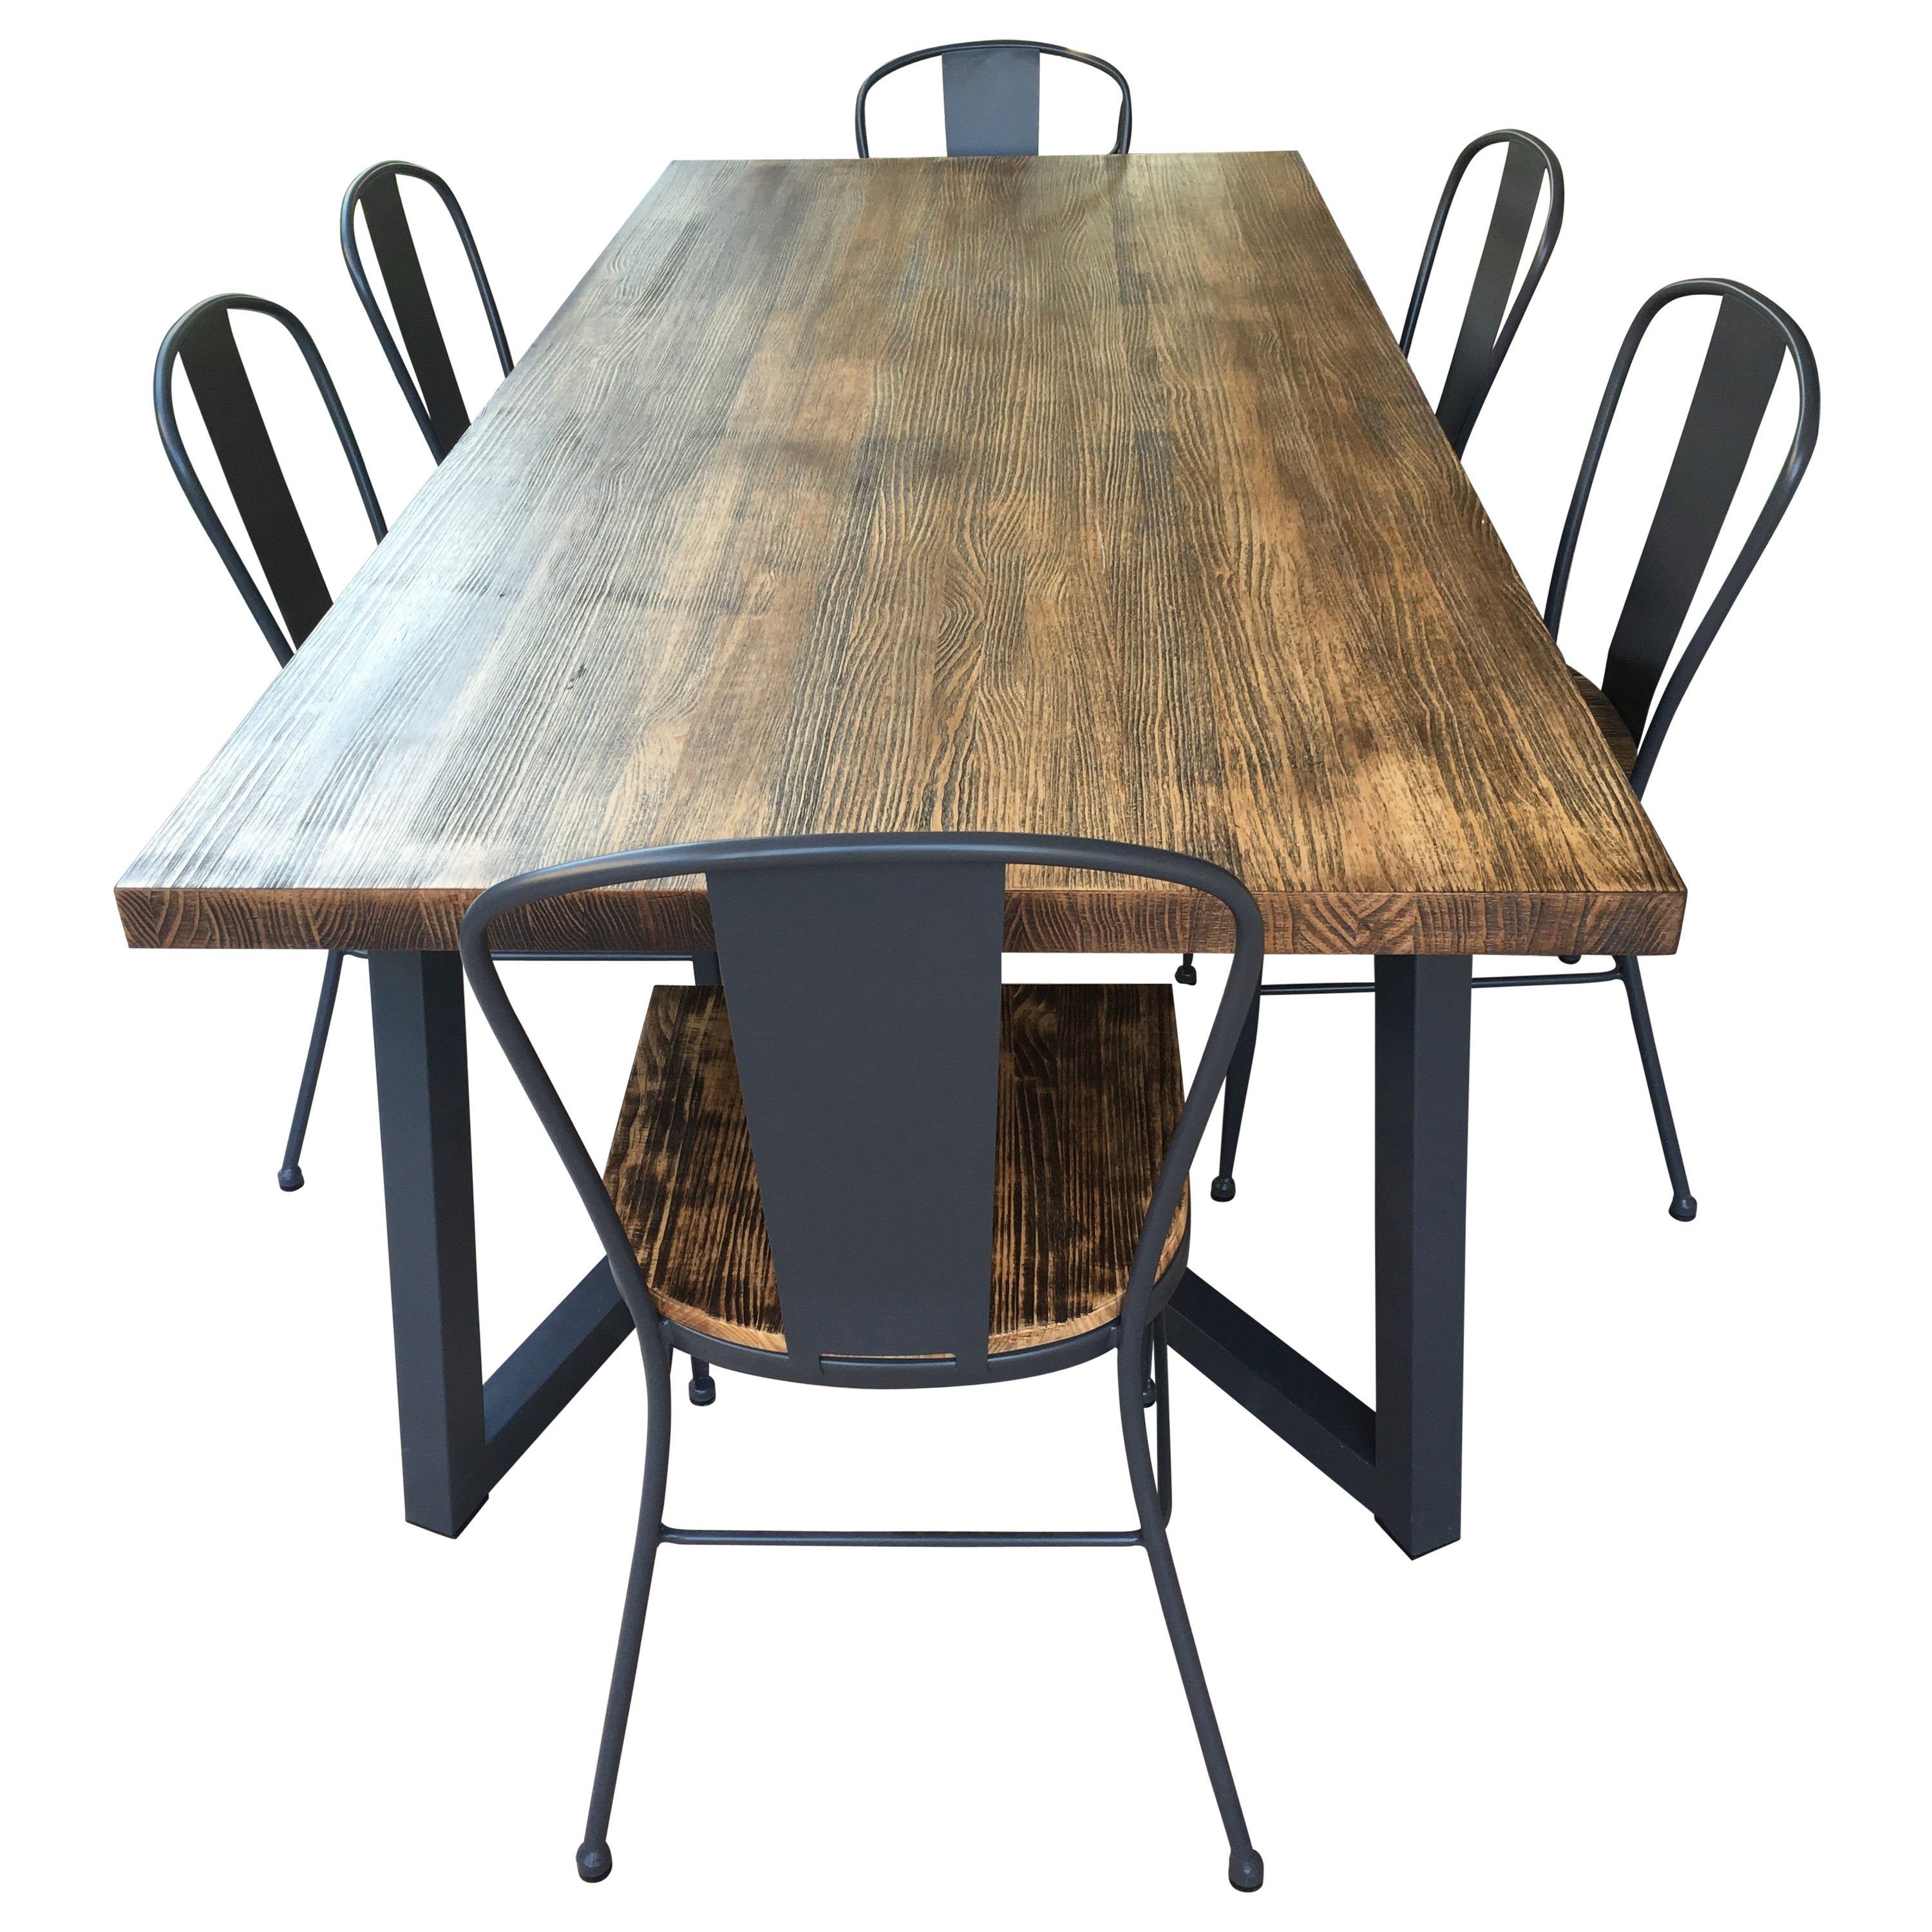 21st Century Wrought Iron Set Of Patio Dining Table And Chairs For